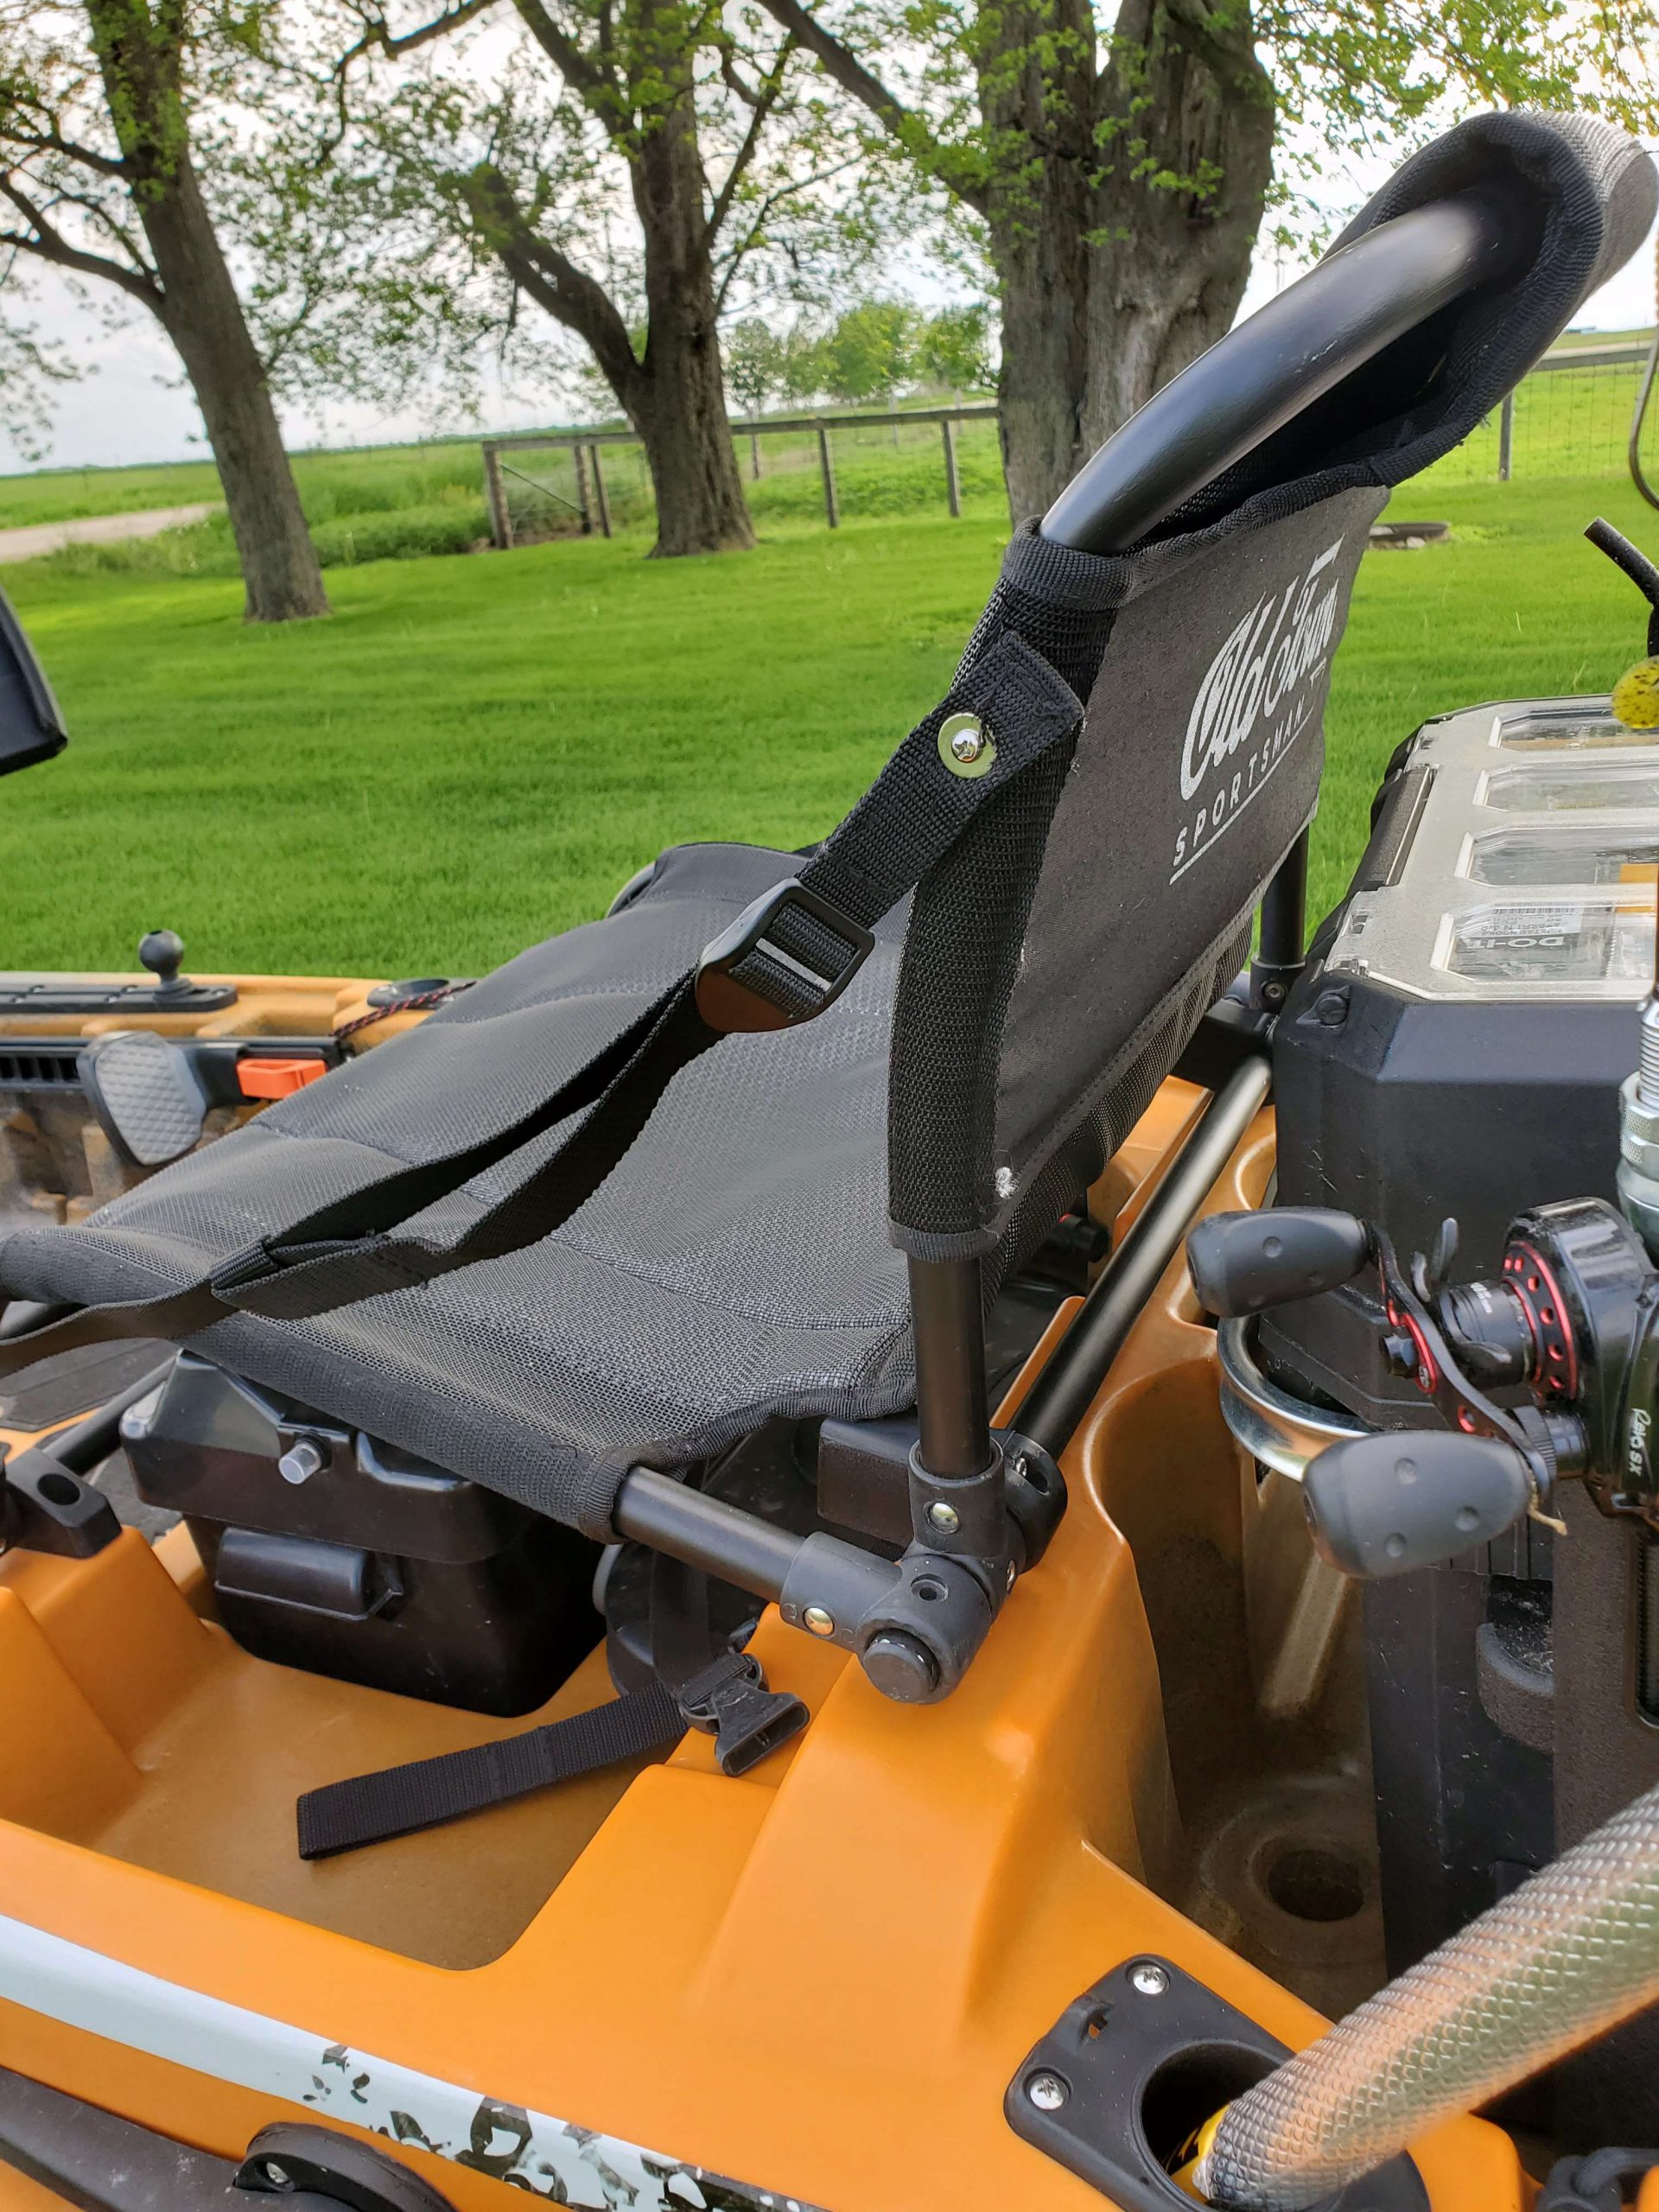 The lawn chair-style seat on his AutoPilot is comfortable and breathable for long competition days on the water.